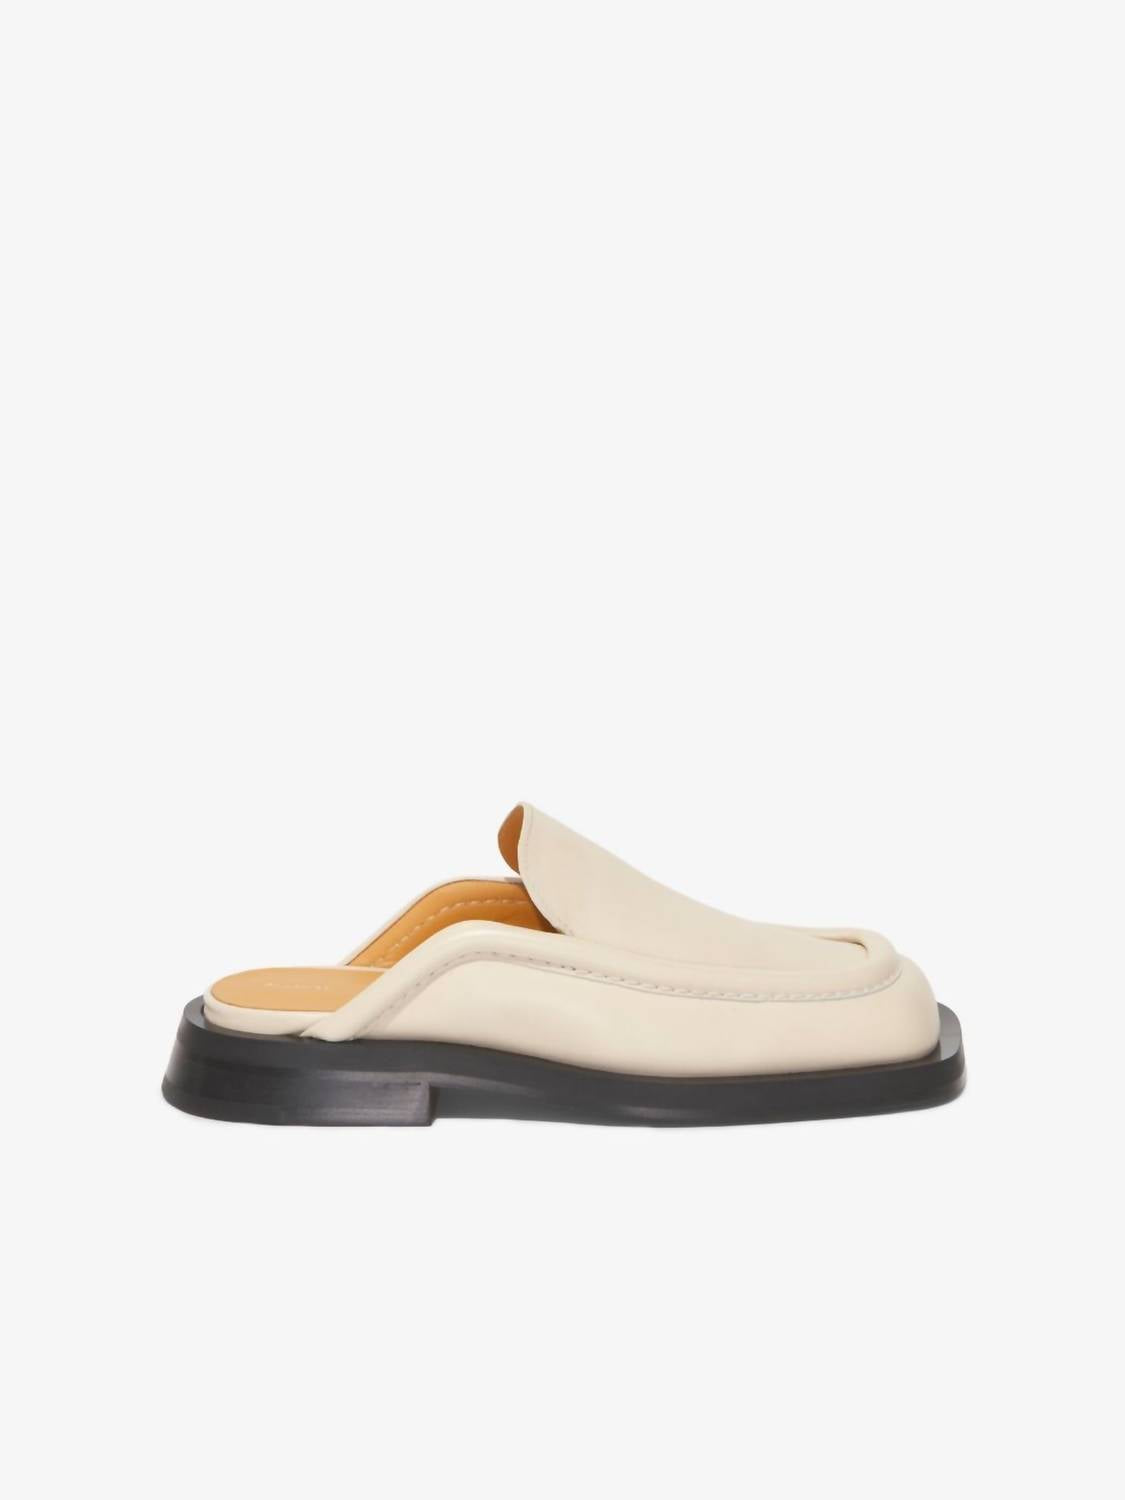 PROENZA SCHOULER Square Loafer Mules In Parchment in Parchment